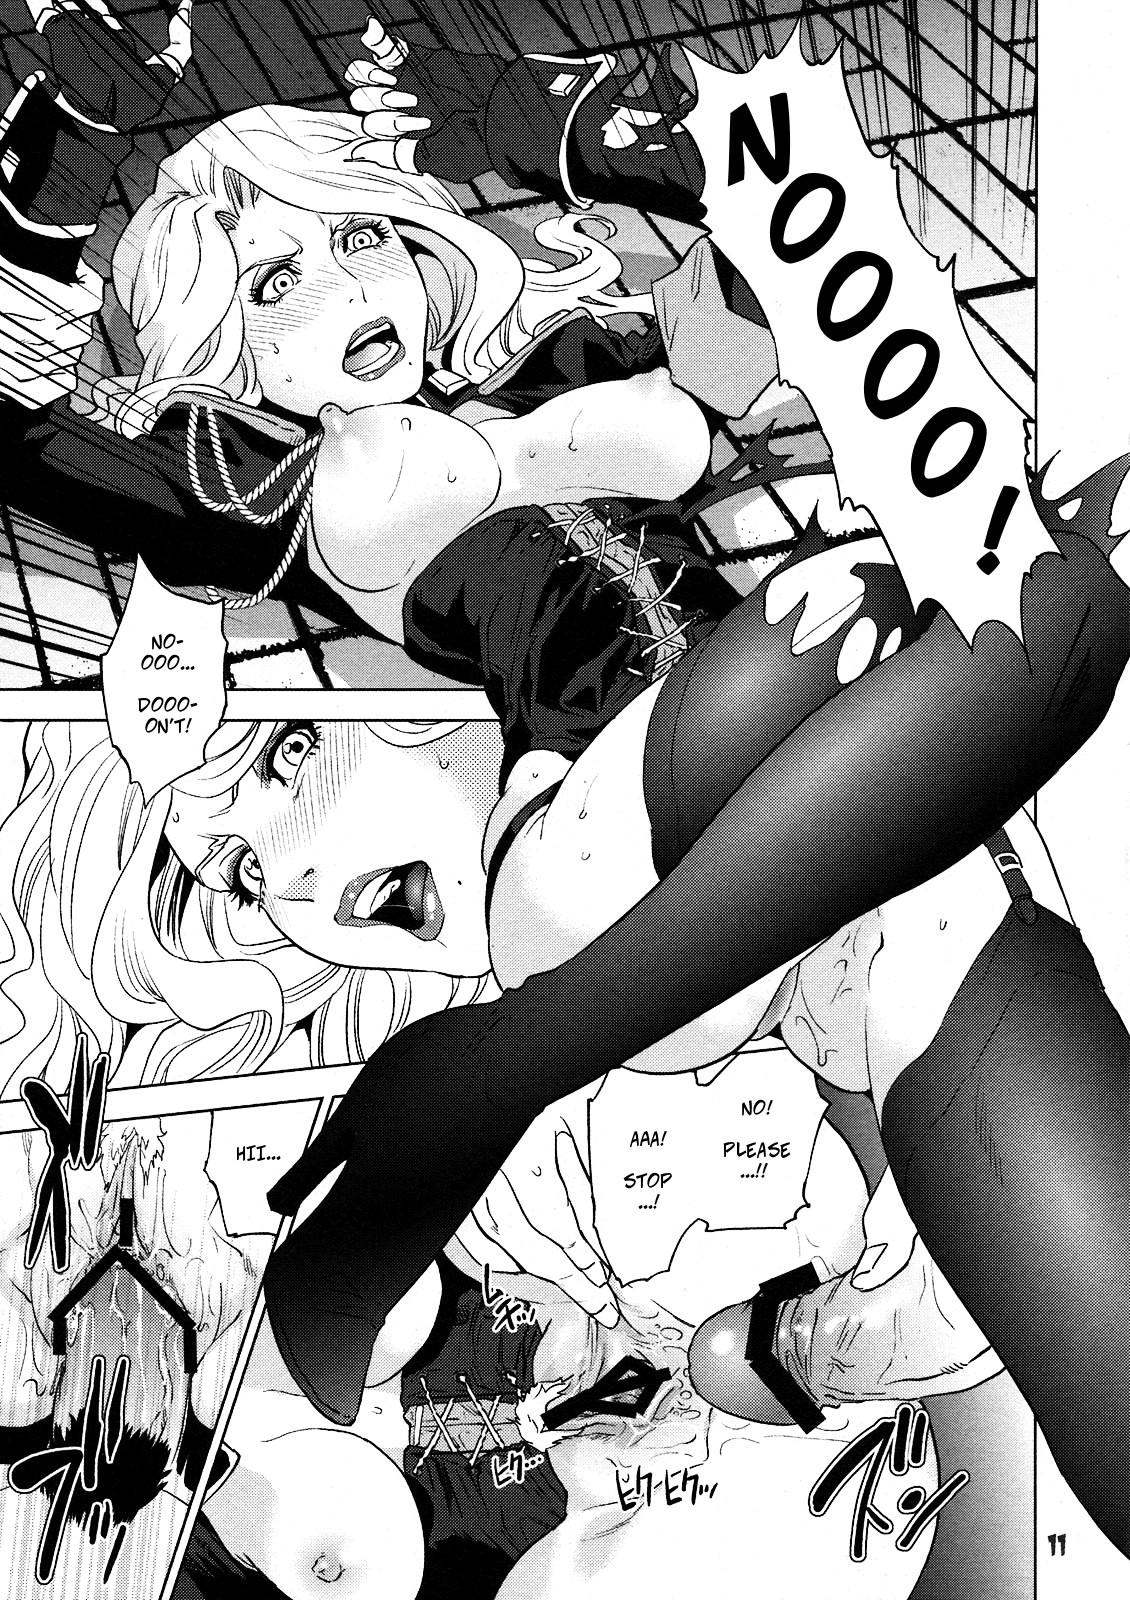 Blowjobs Agnes-san Oshigoto desu! | It's Time For Work, Ms. Agnes! - Tiger and bunny Bubblebutt - Page 11